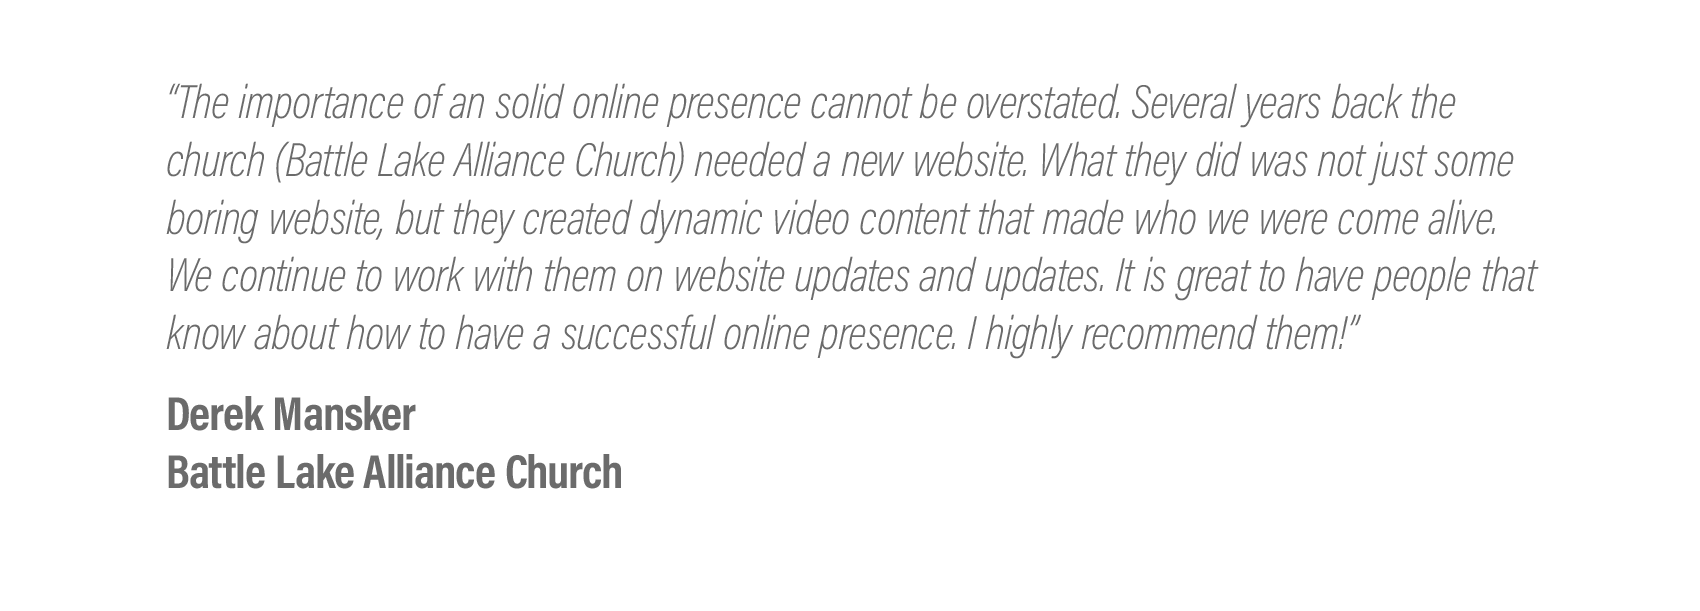  “The importance of an solid online presence cannot be overstated. Several years back the church (Battle Lake Alliance Church) needed a new website. What they did was not just some boring website, but they created dynamic video content that made who 